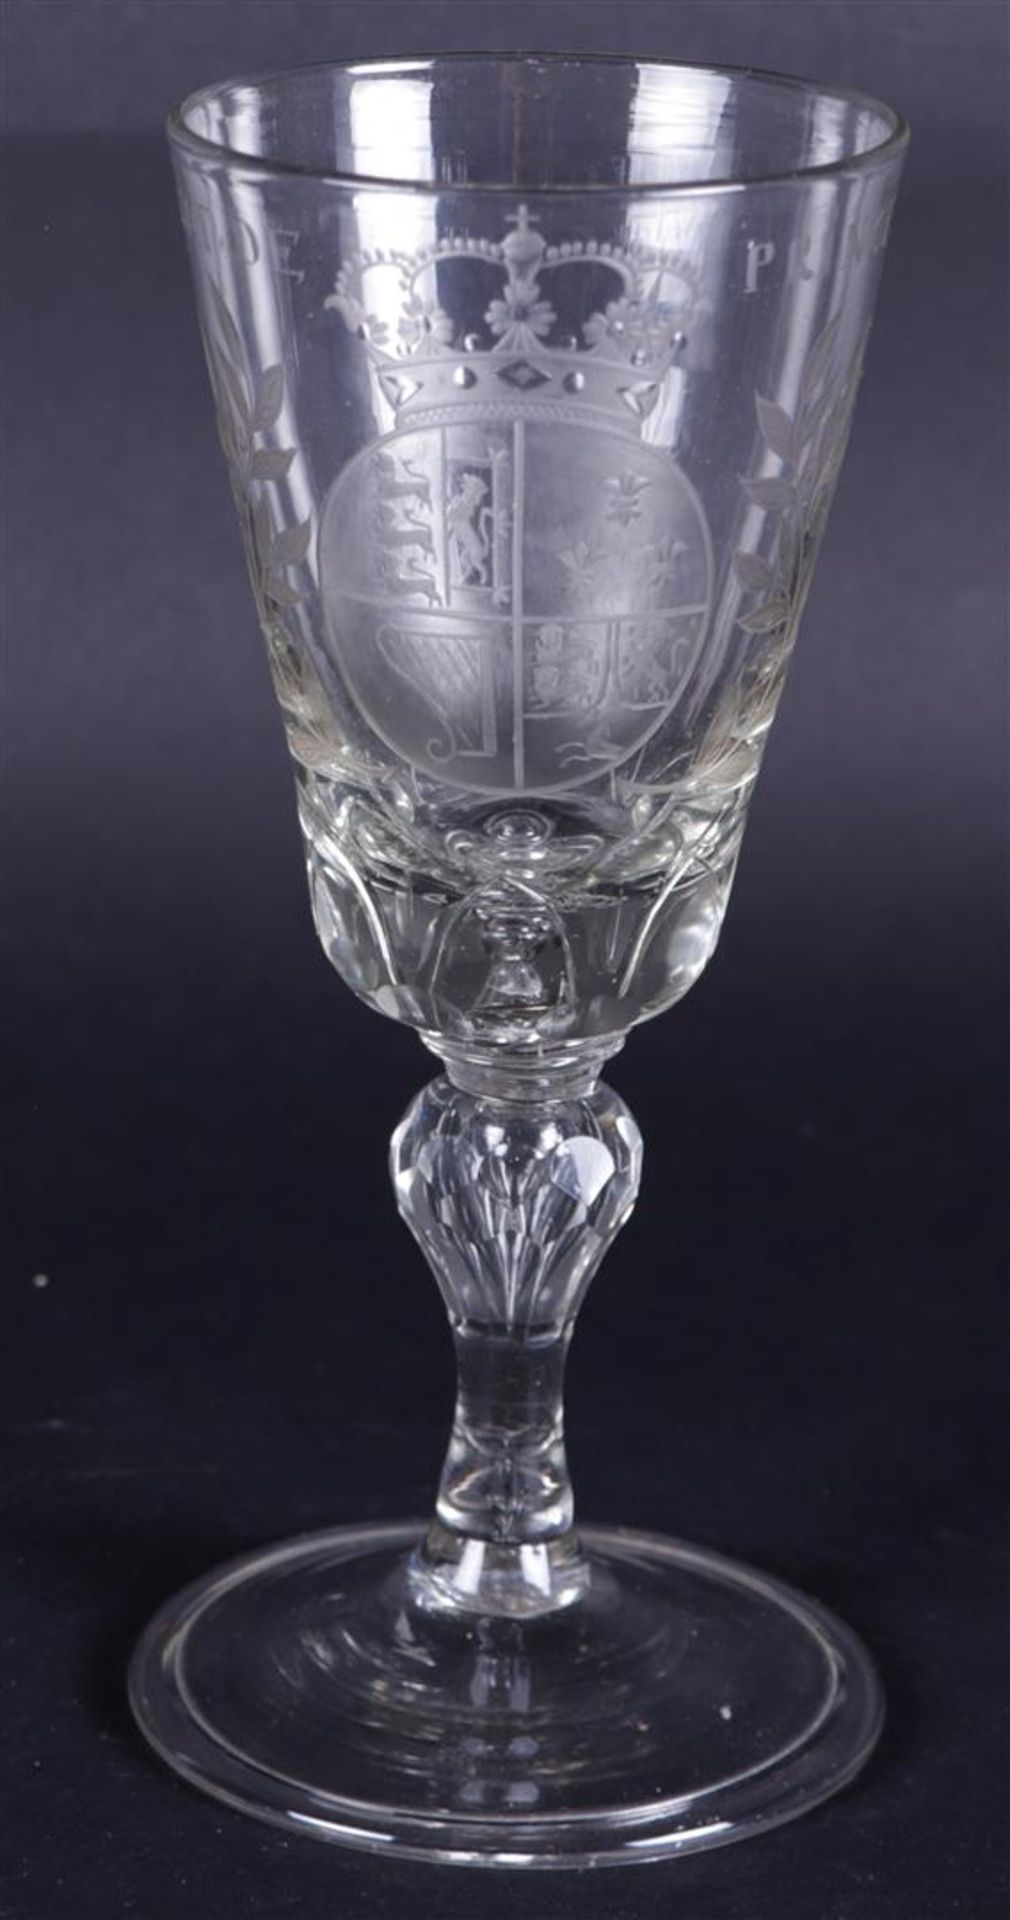 An etched wine glass with the English Royal coat of arms, above which the text "VIVAT DE PRINCES".
H